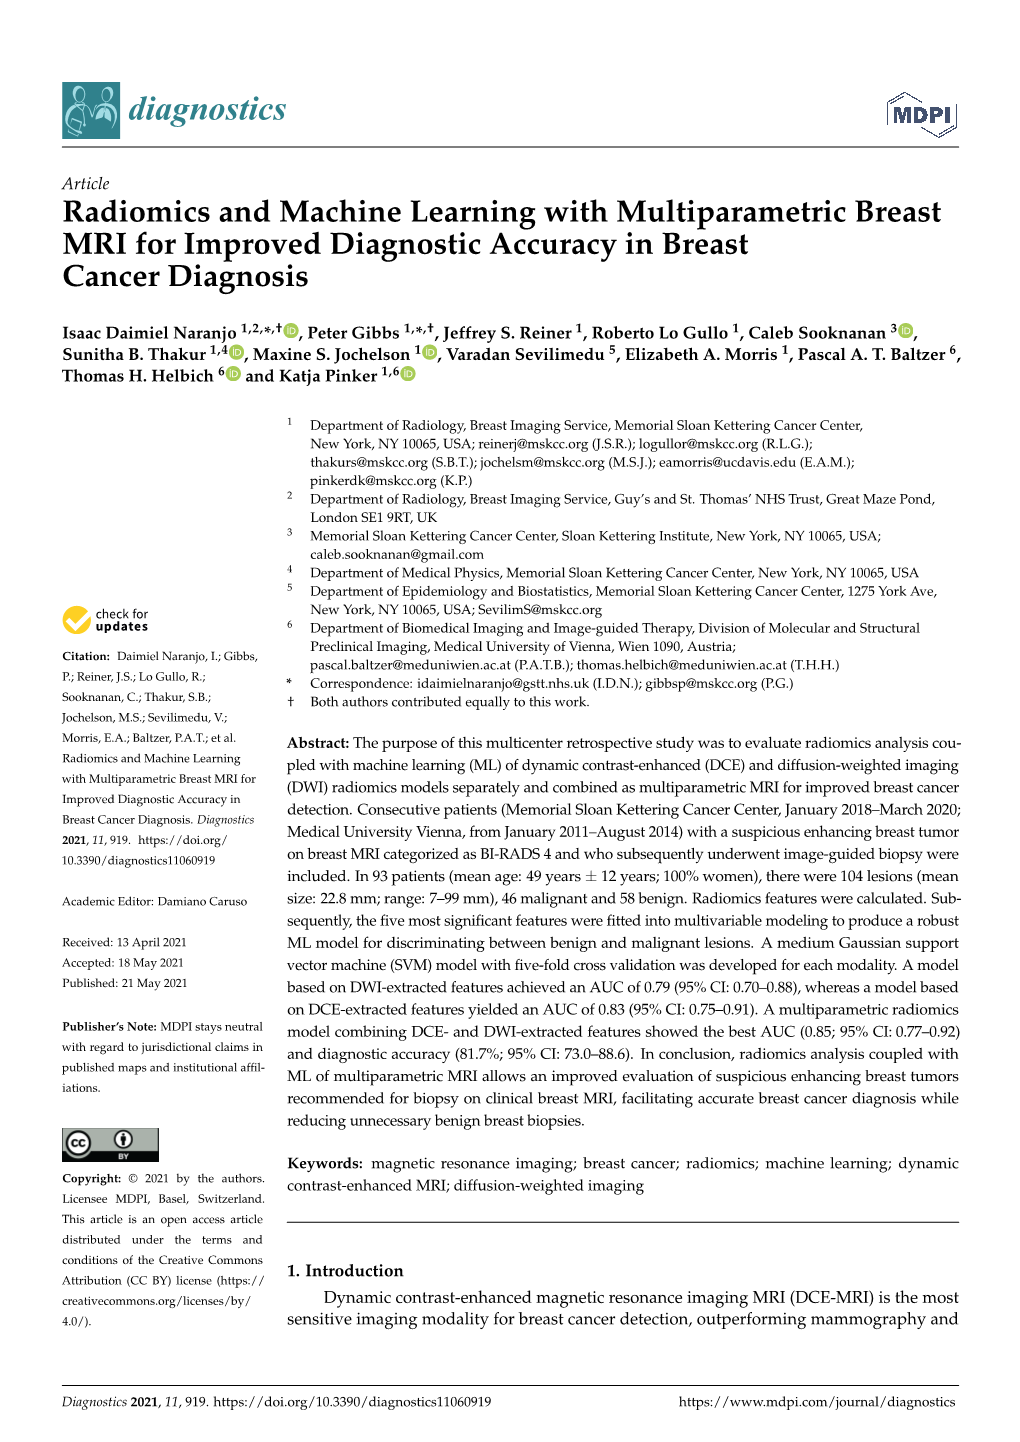 Radiomics and Machine Learning with Multiparametric Breast MRI for Improved Diagnostic Accuracy in Breast Cancer Diagnosis